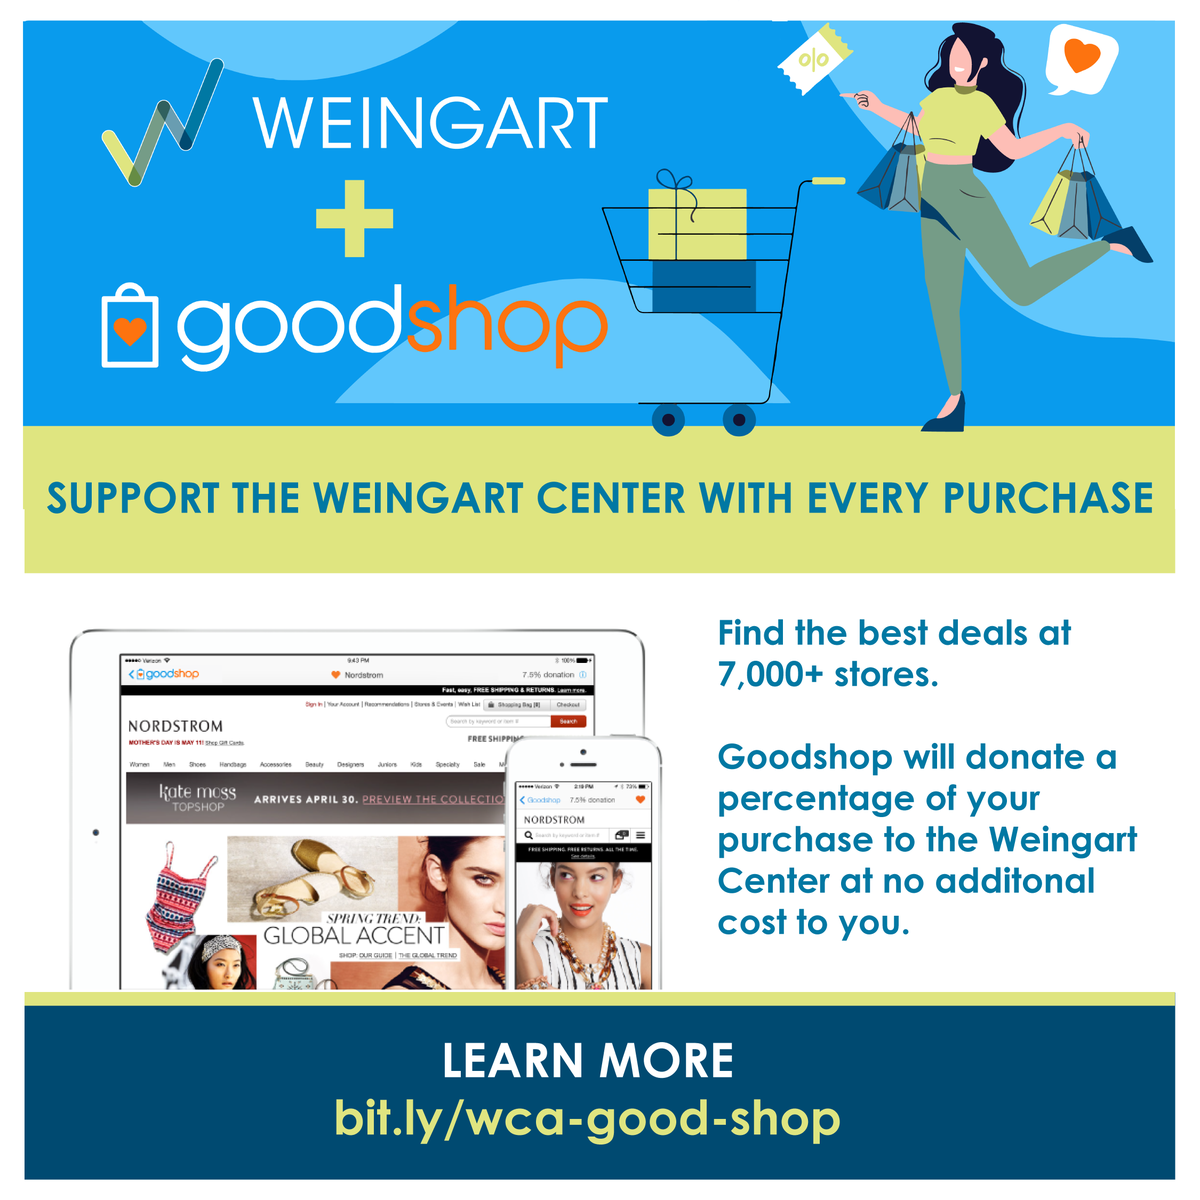 Miss #AmazonSmile? So do we. But here’s some good news…with Good Shop, you can shop at 7000+ stores and they will donate a portion of the sale to the Weingart Center — at no additional cost to you. bit.ly/wca-good-shop